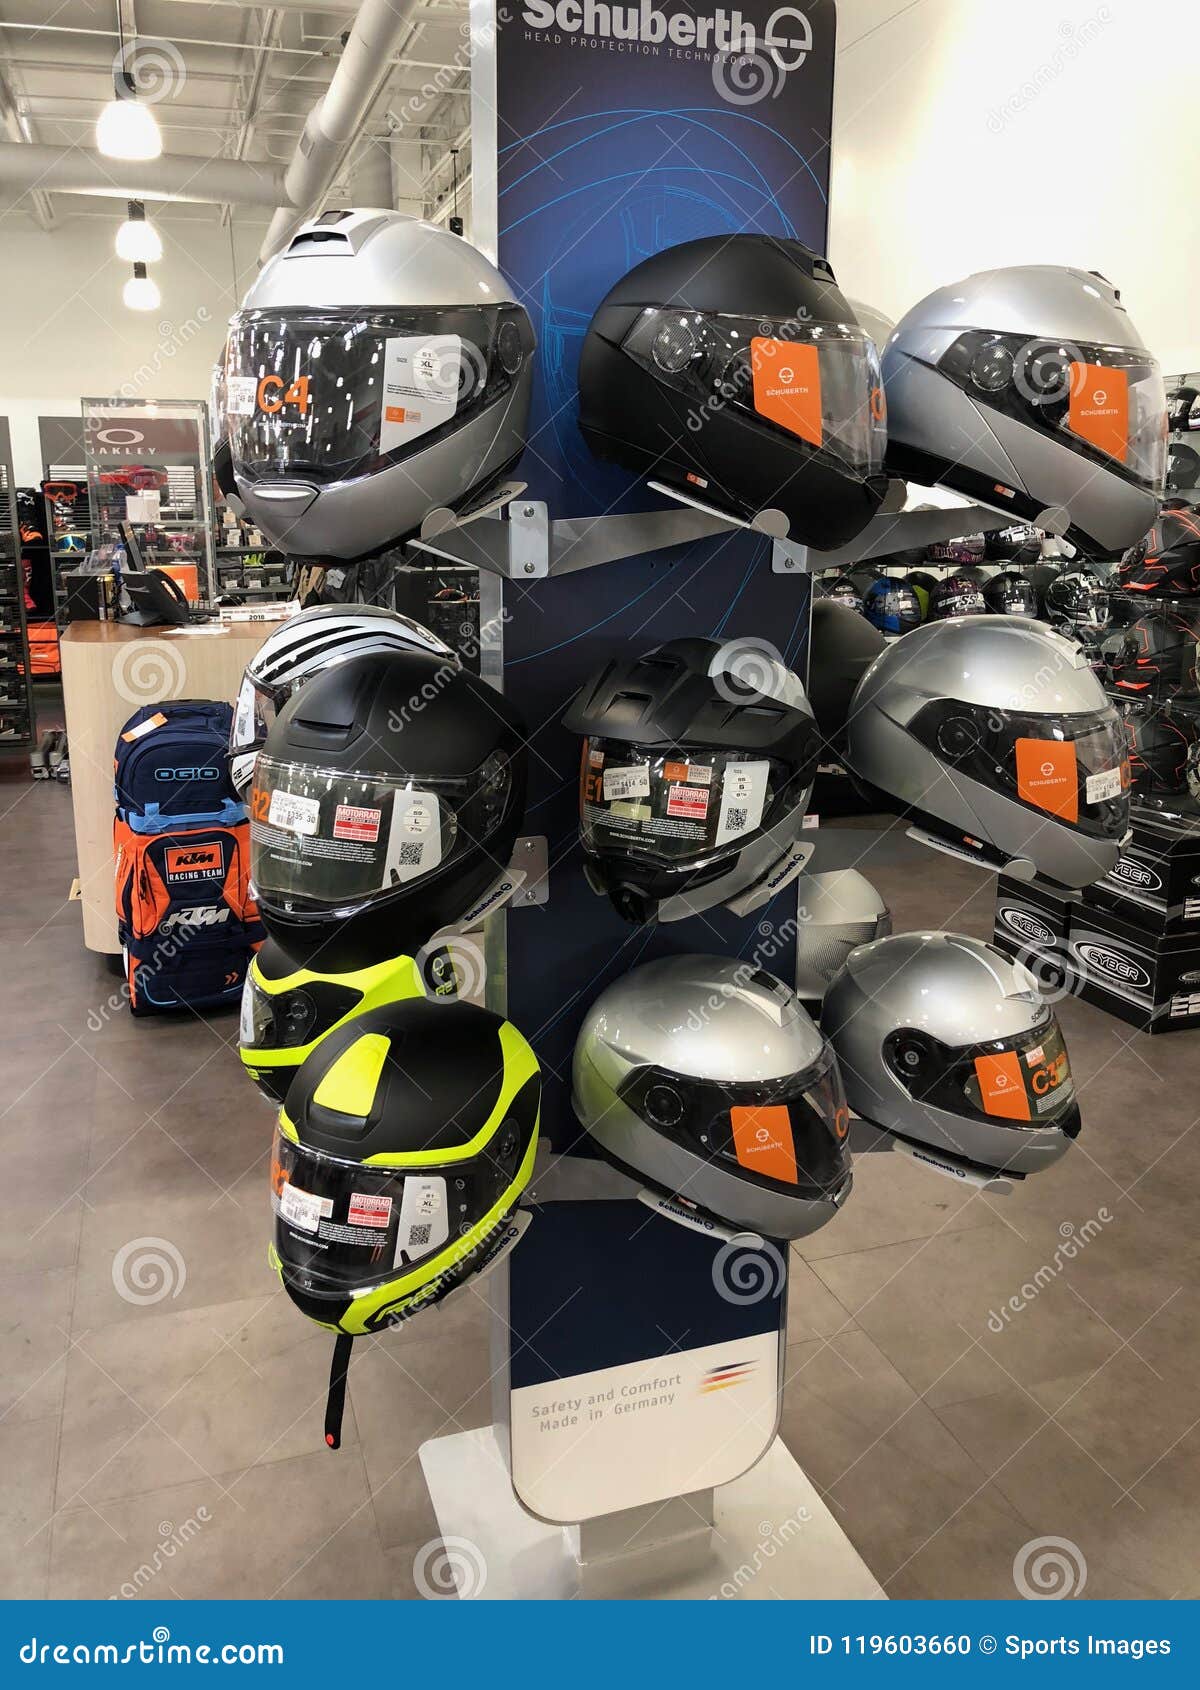 Motorcycle Equipment Shops Near Me - Motorcycle You